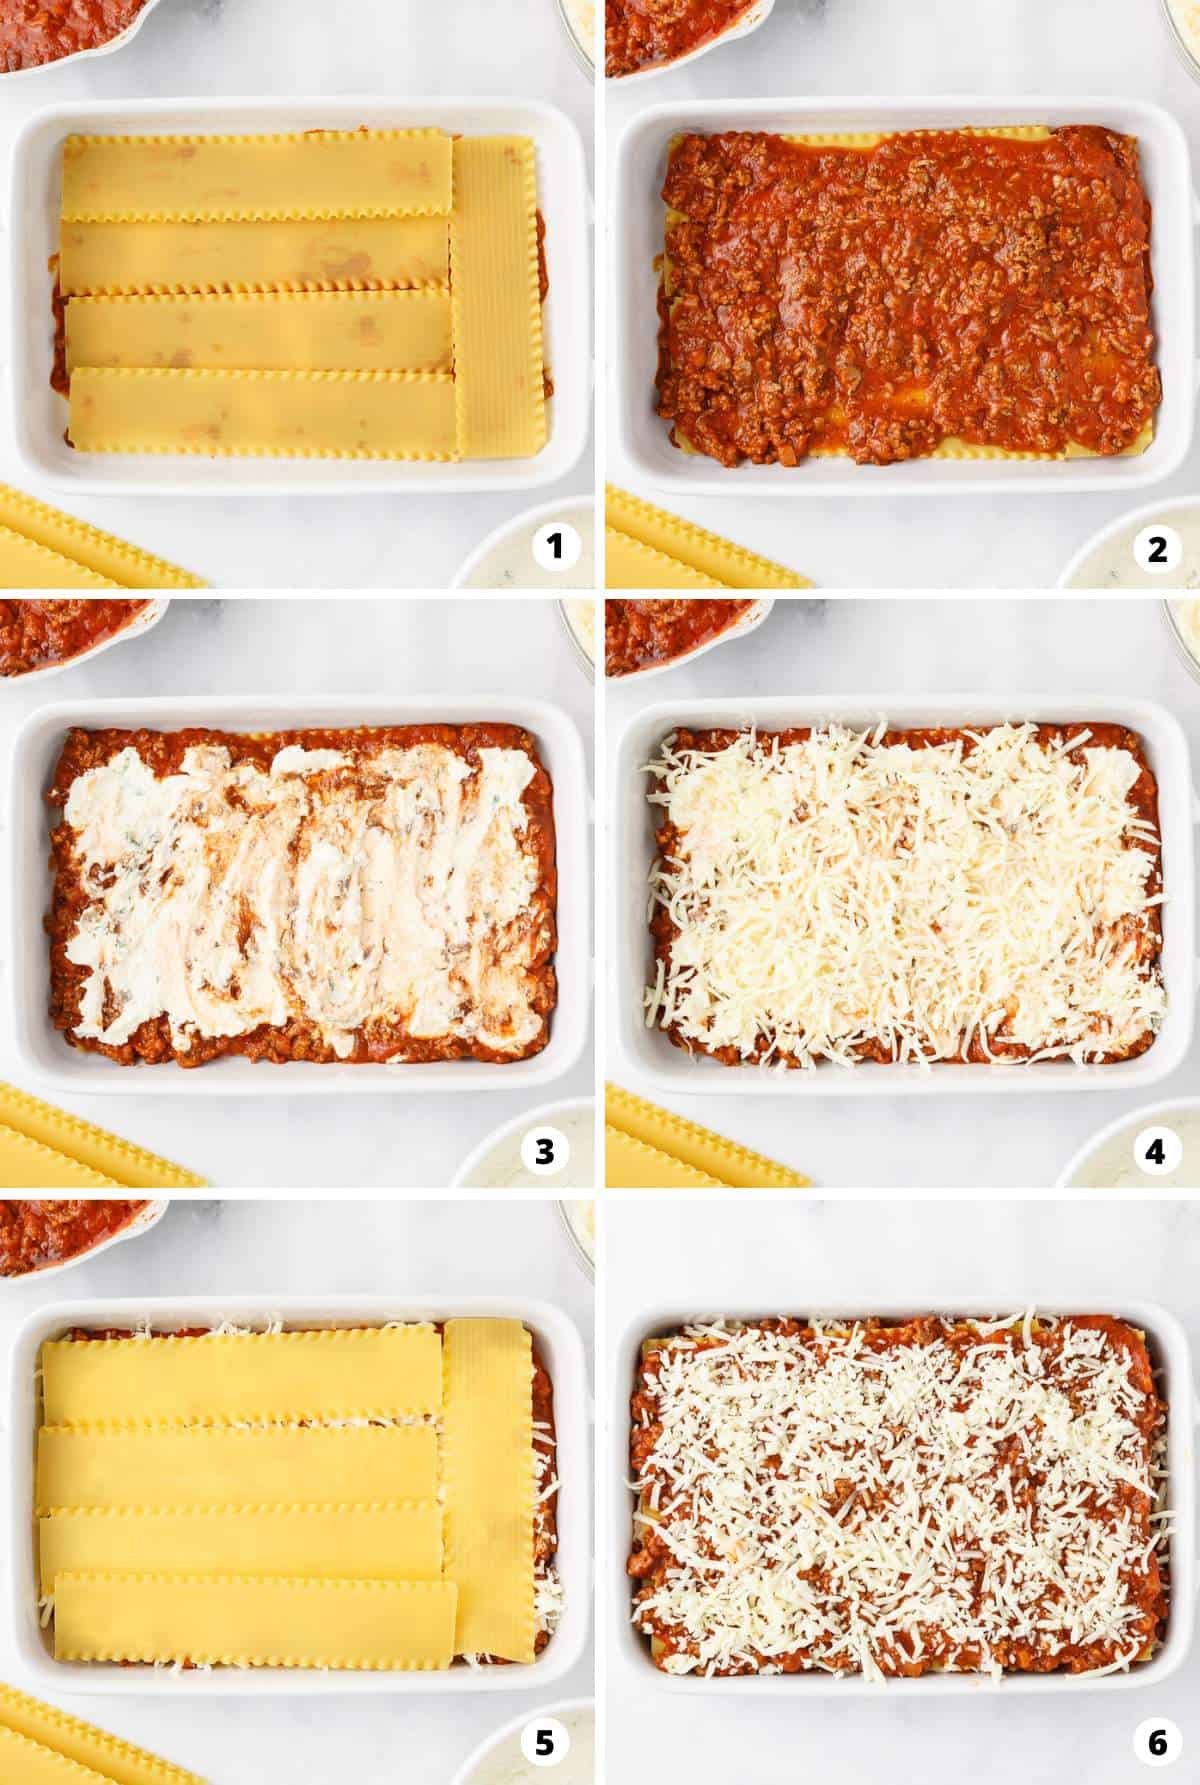 Showing how to make lasagna in a 6 step collage.